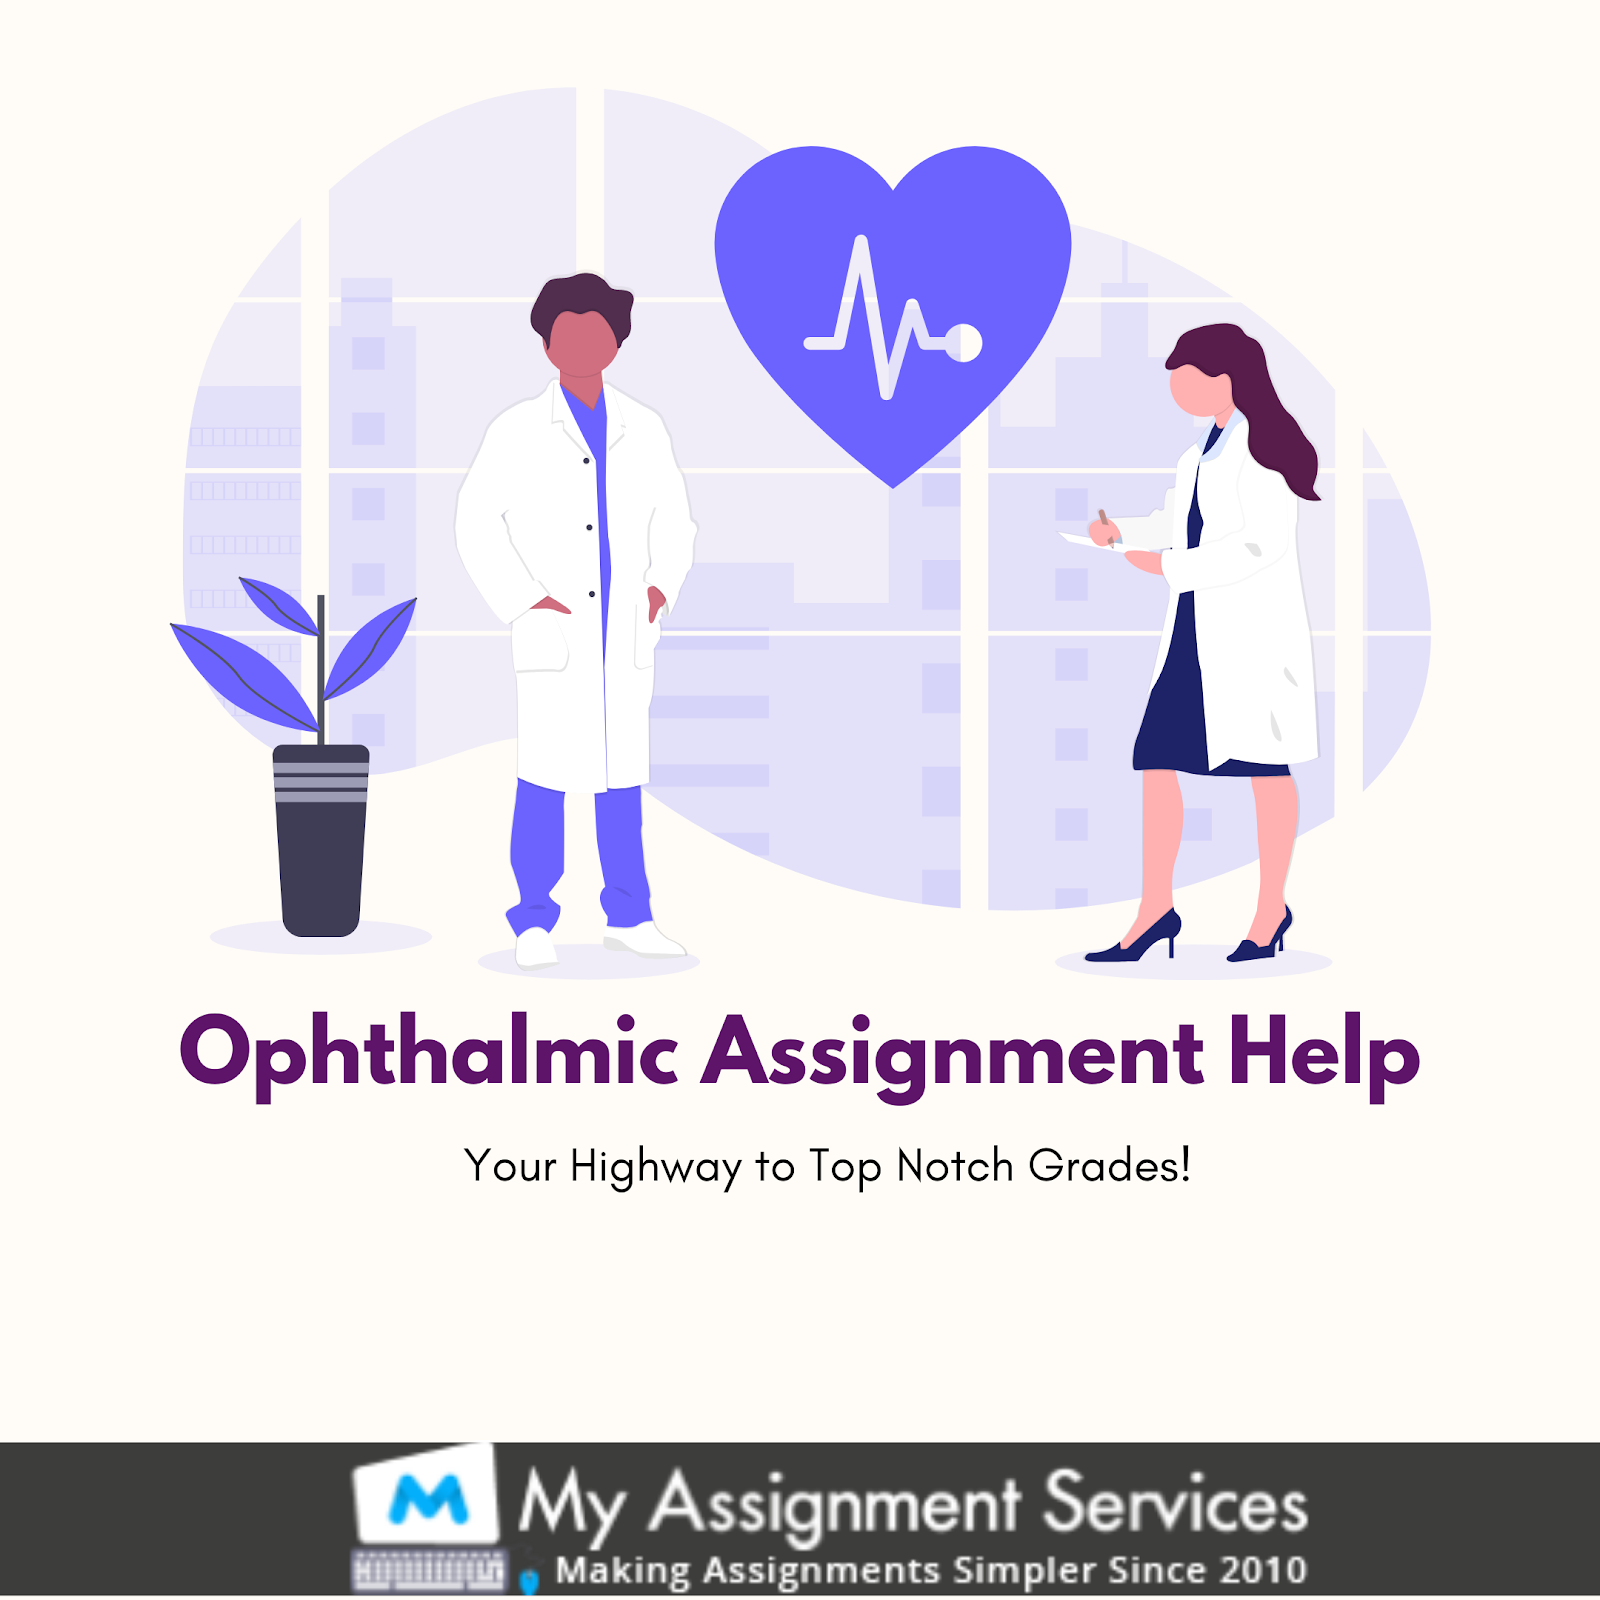 Ophthalmic Assignment Help